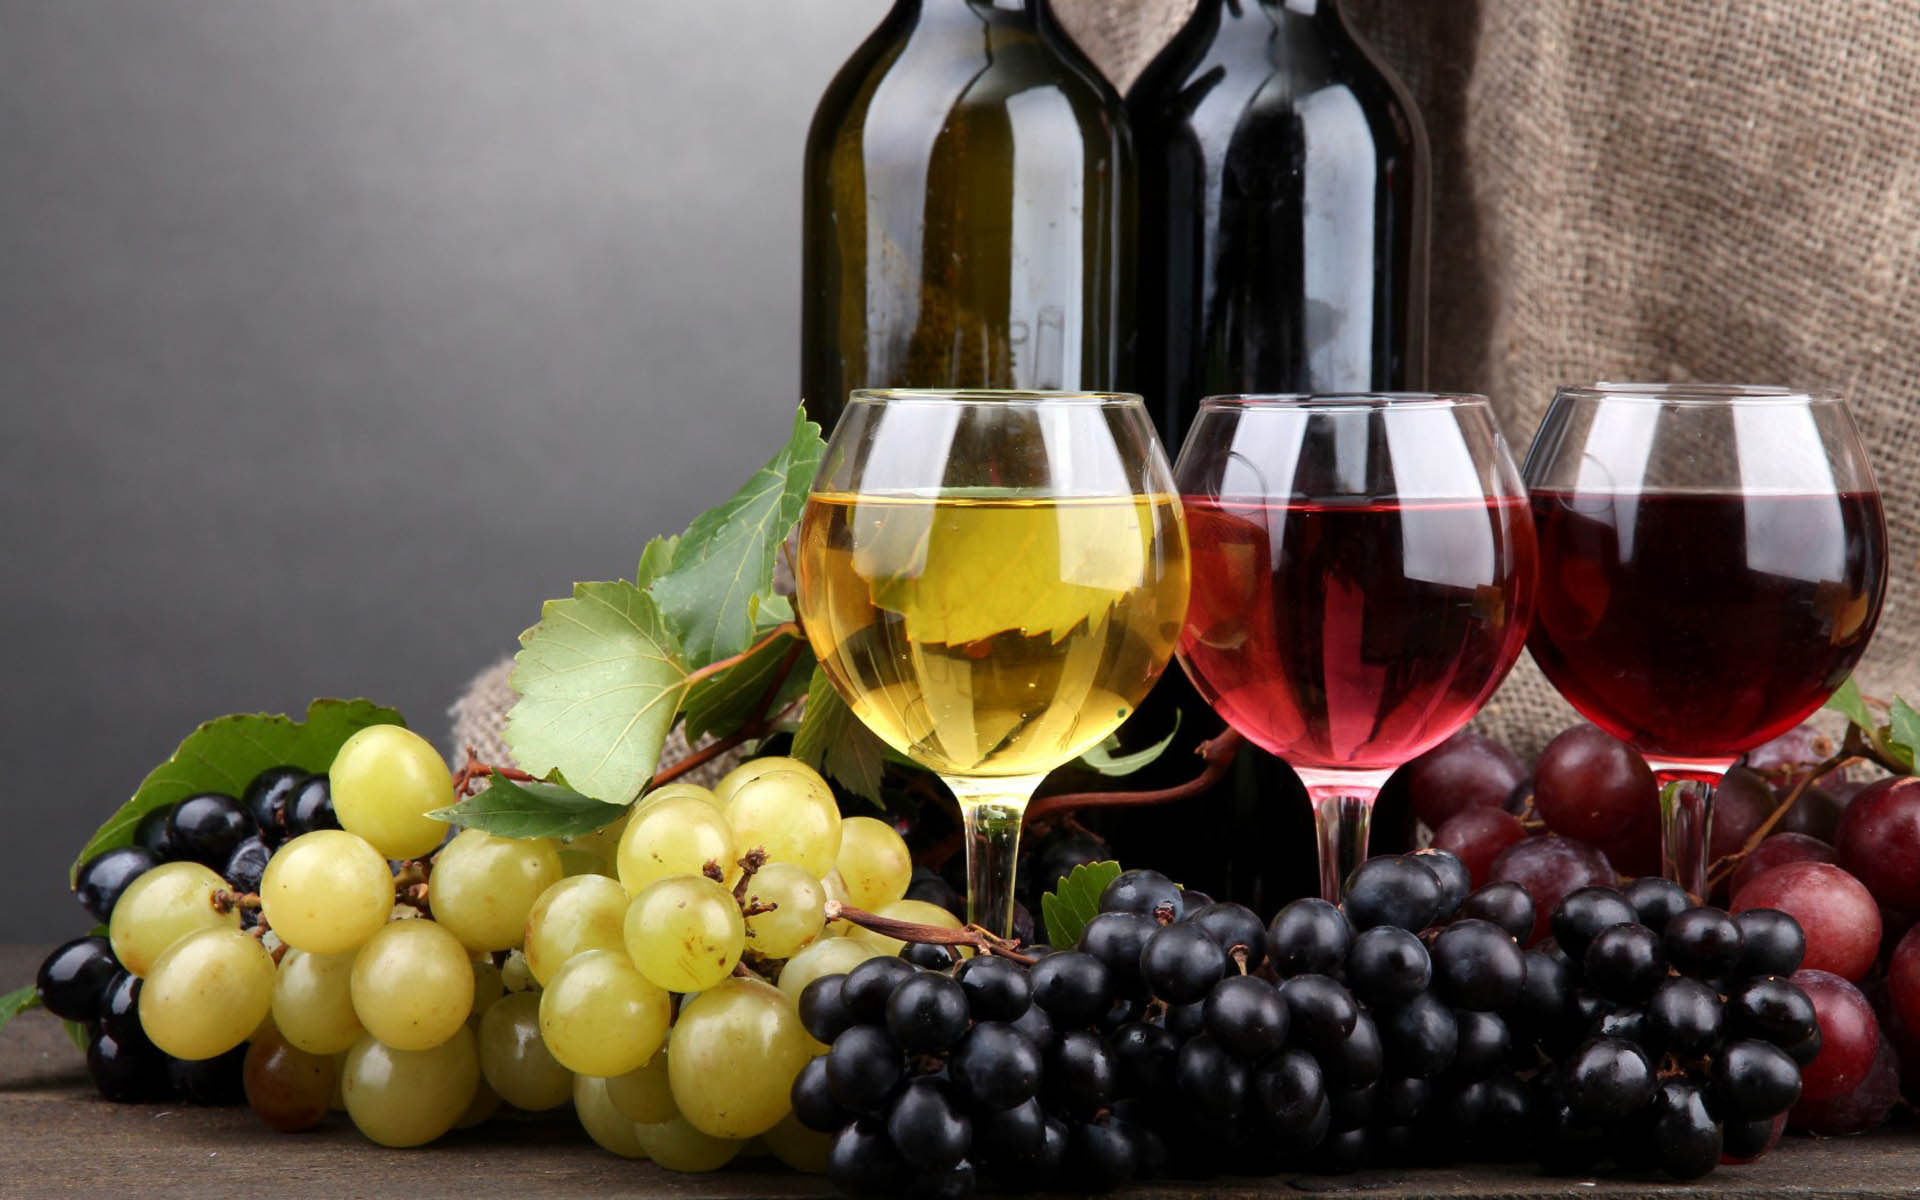 Images of Wine | 1920x1200